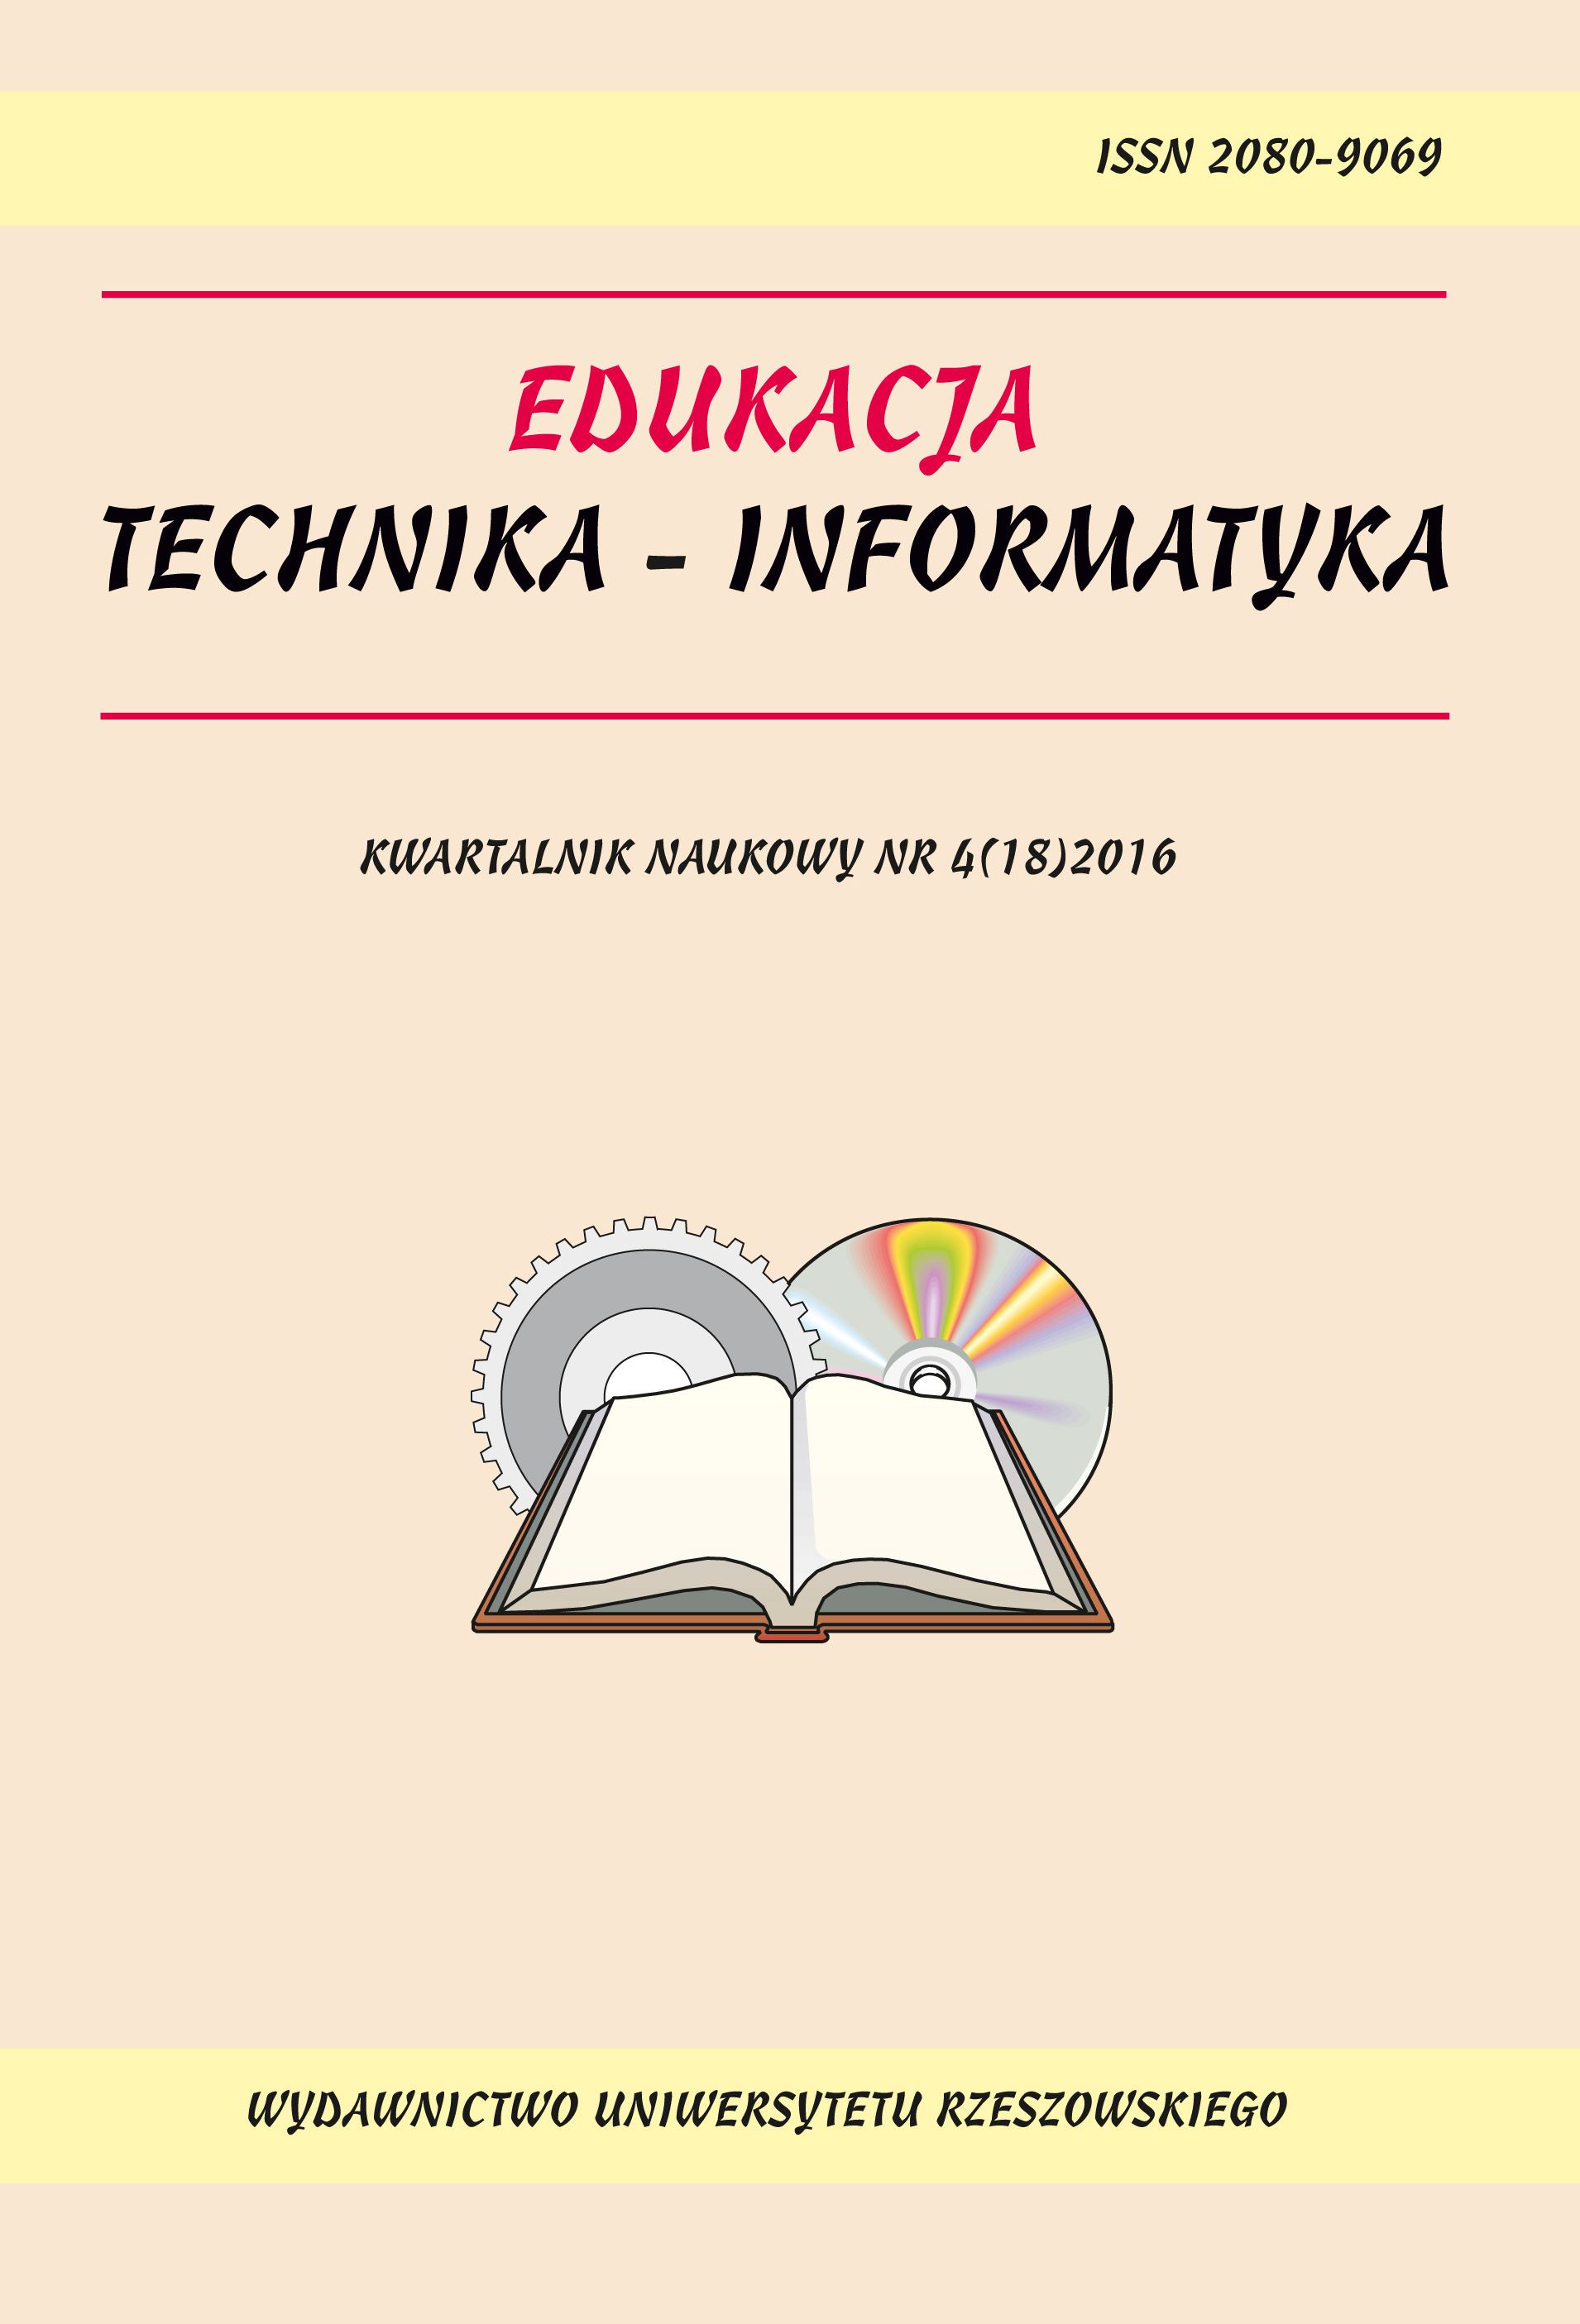 Blog in technical education Cover Image